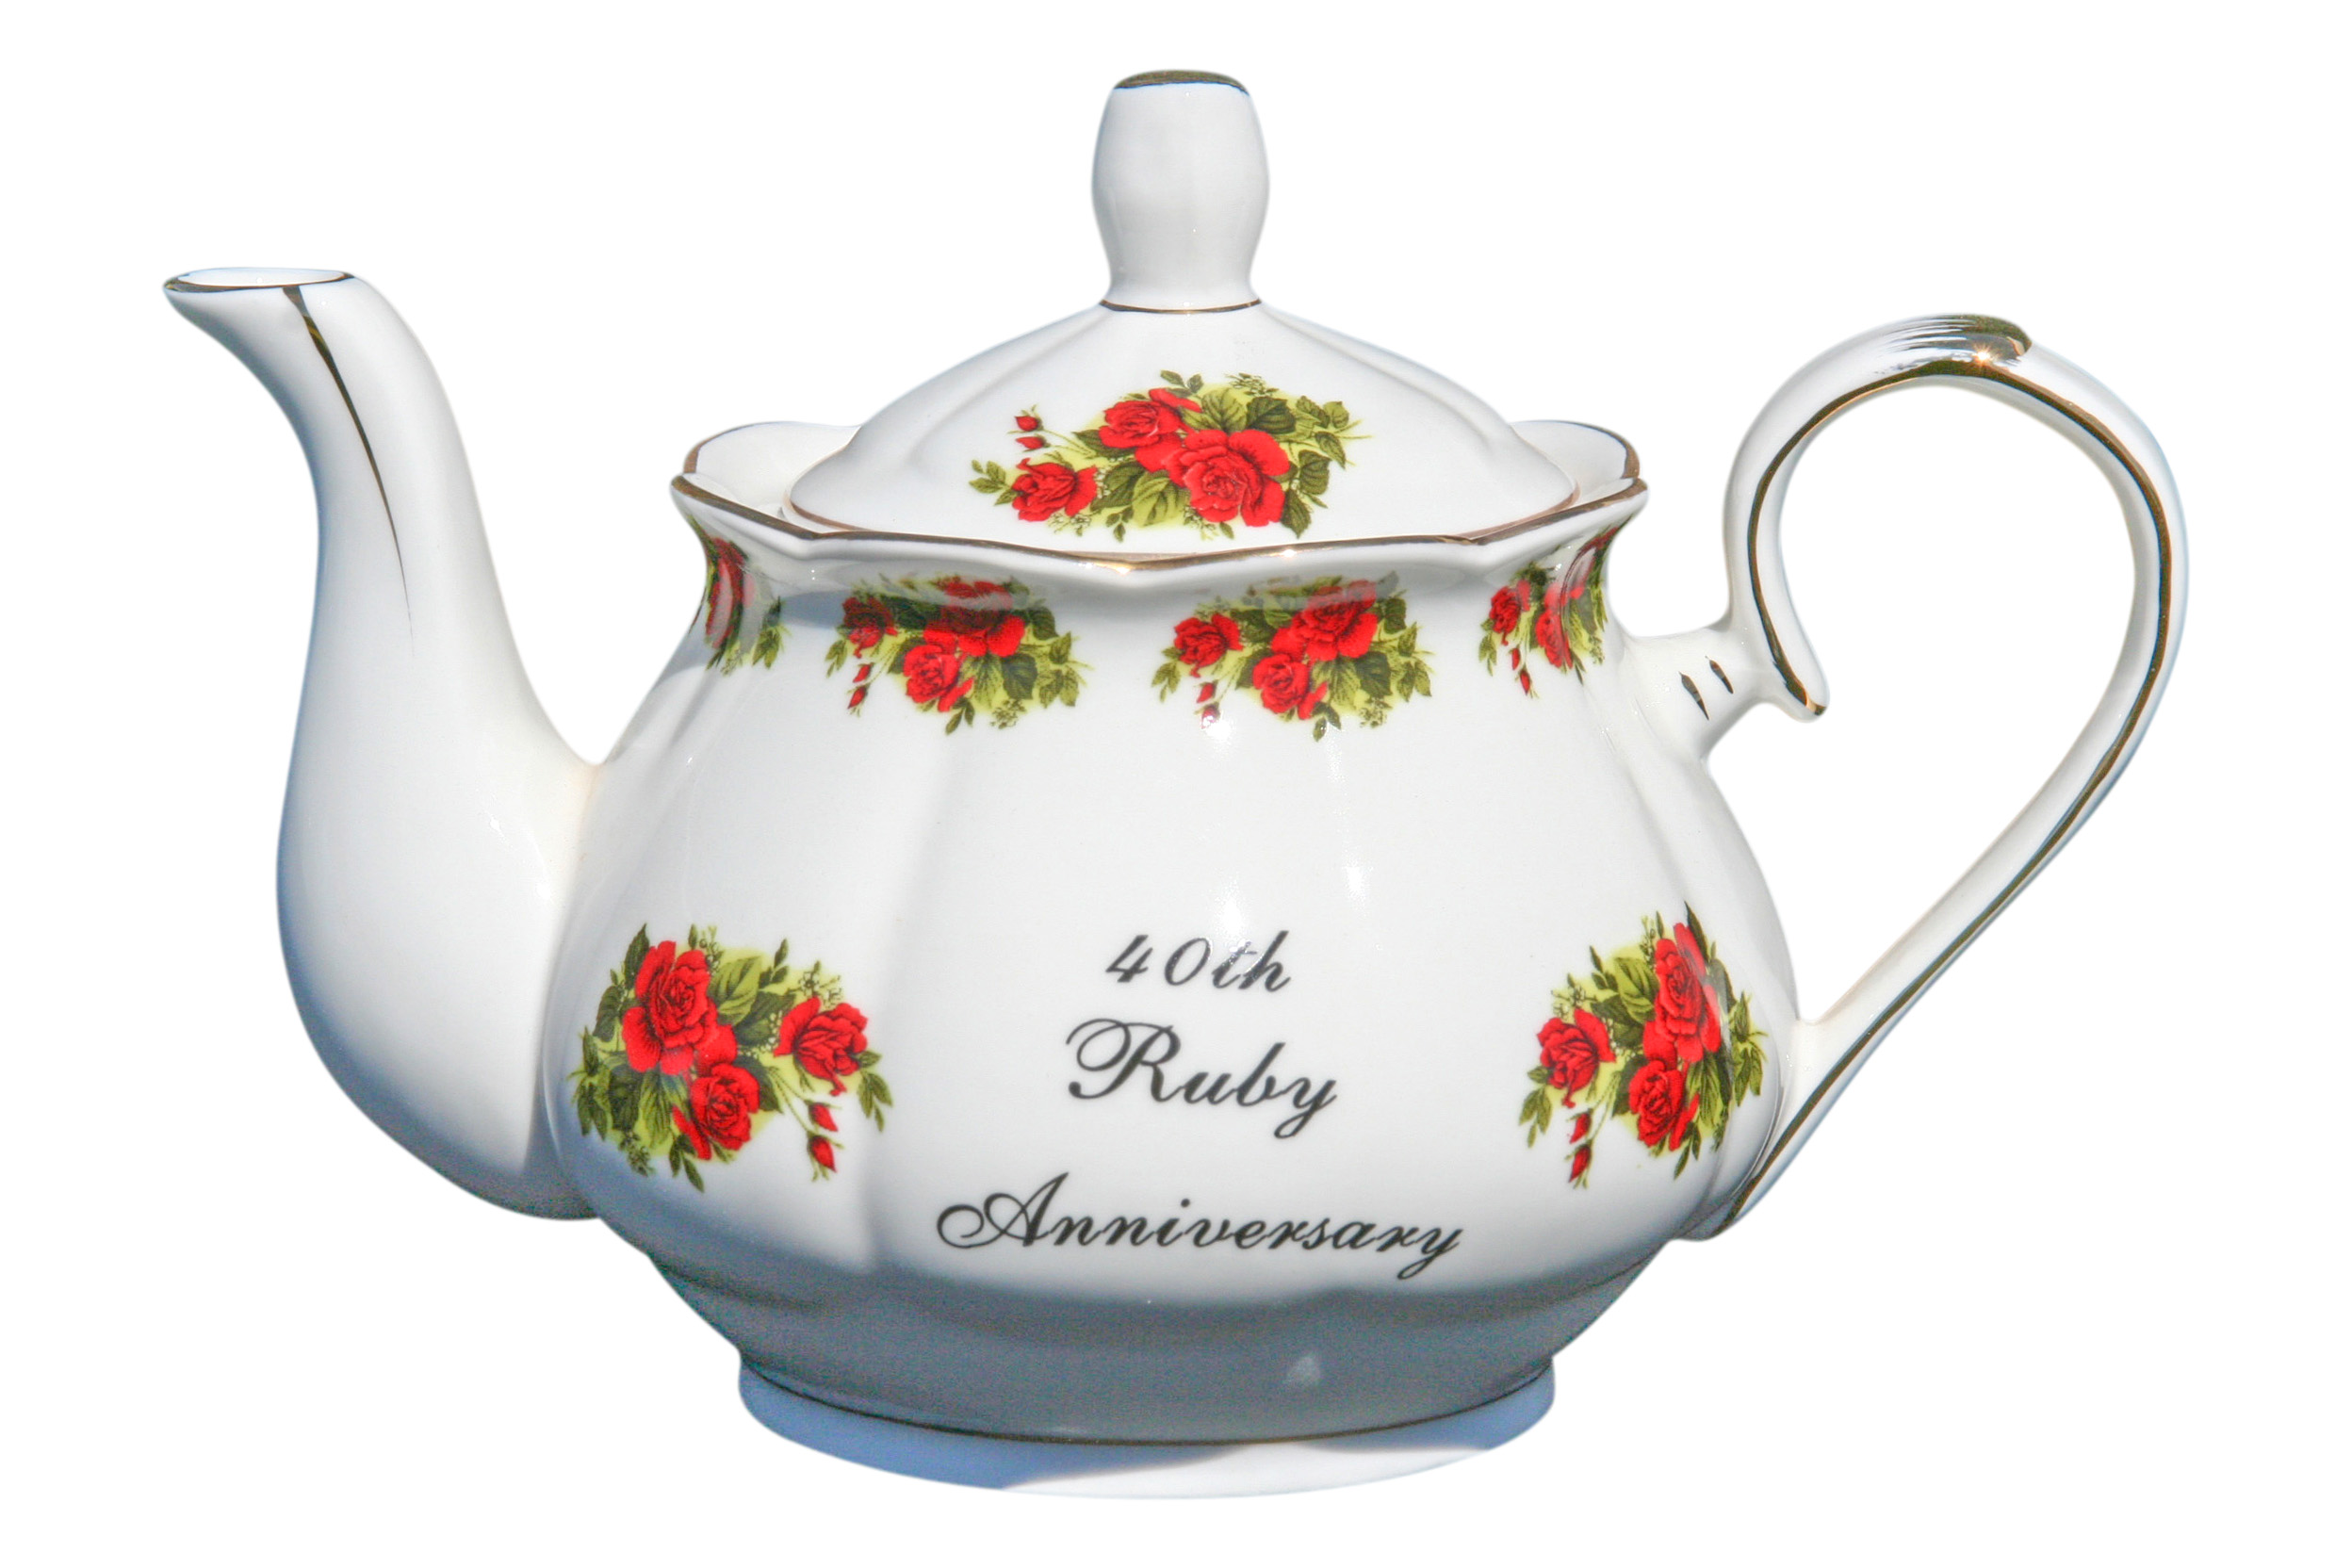 40th Anniversary 2 cup Teapot